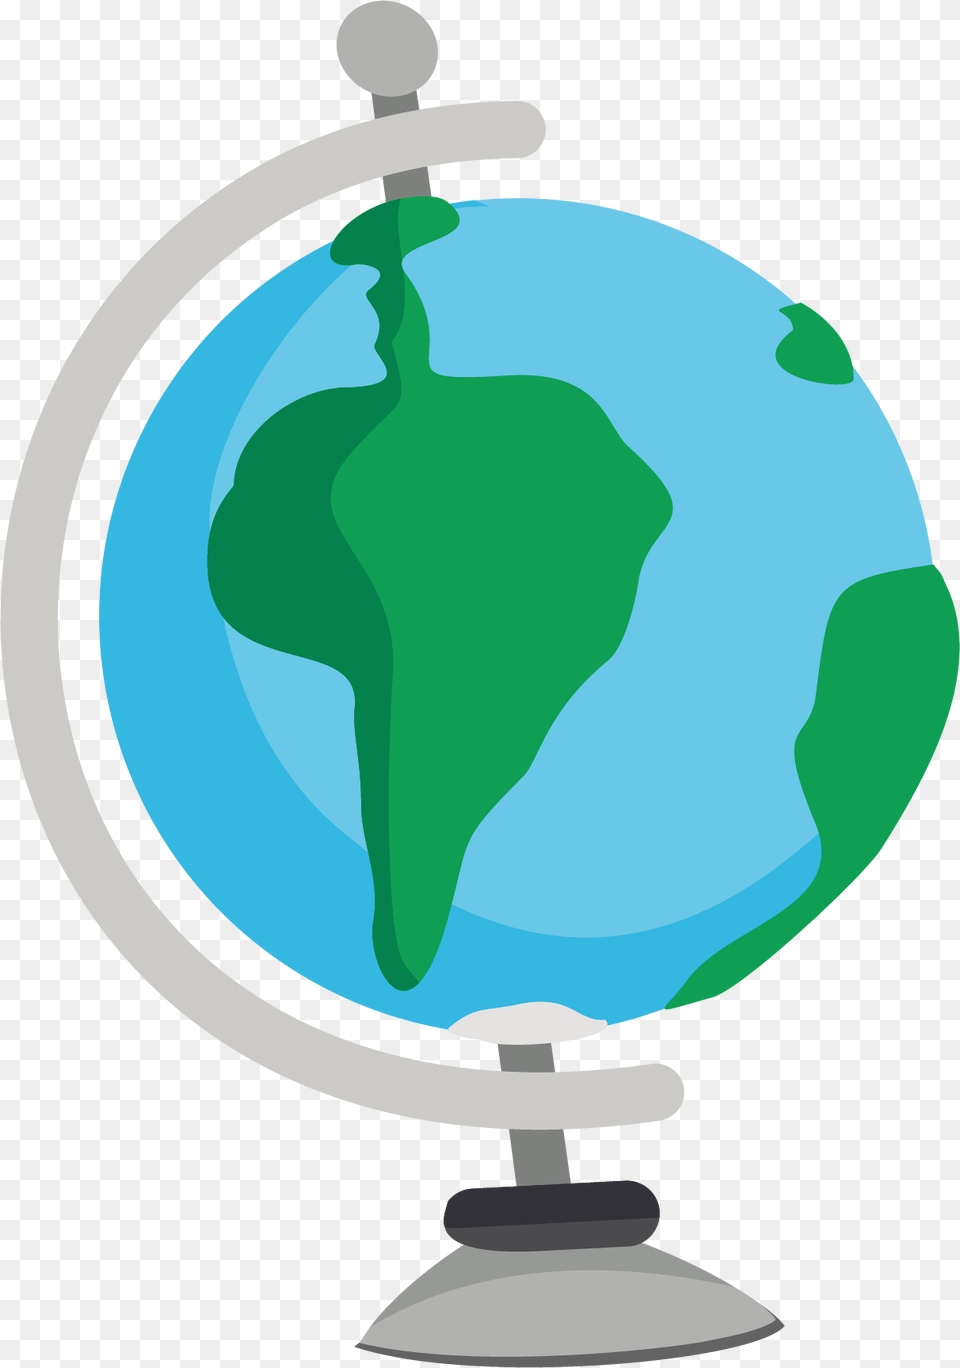 Earth Globe Desktop Computer Cartoon Vector Transparent Globe, Astronomy, Outer Space, Planet Png Image